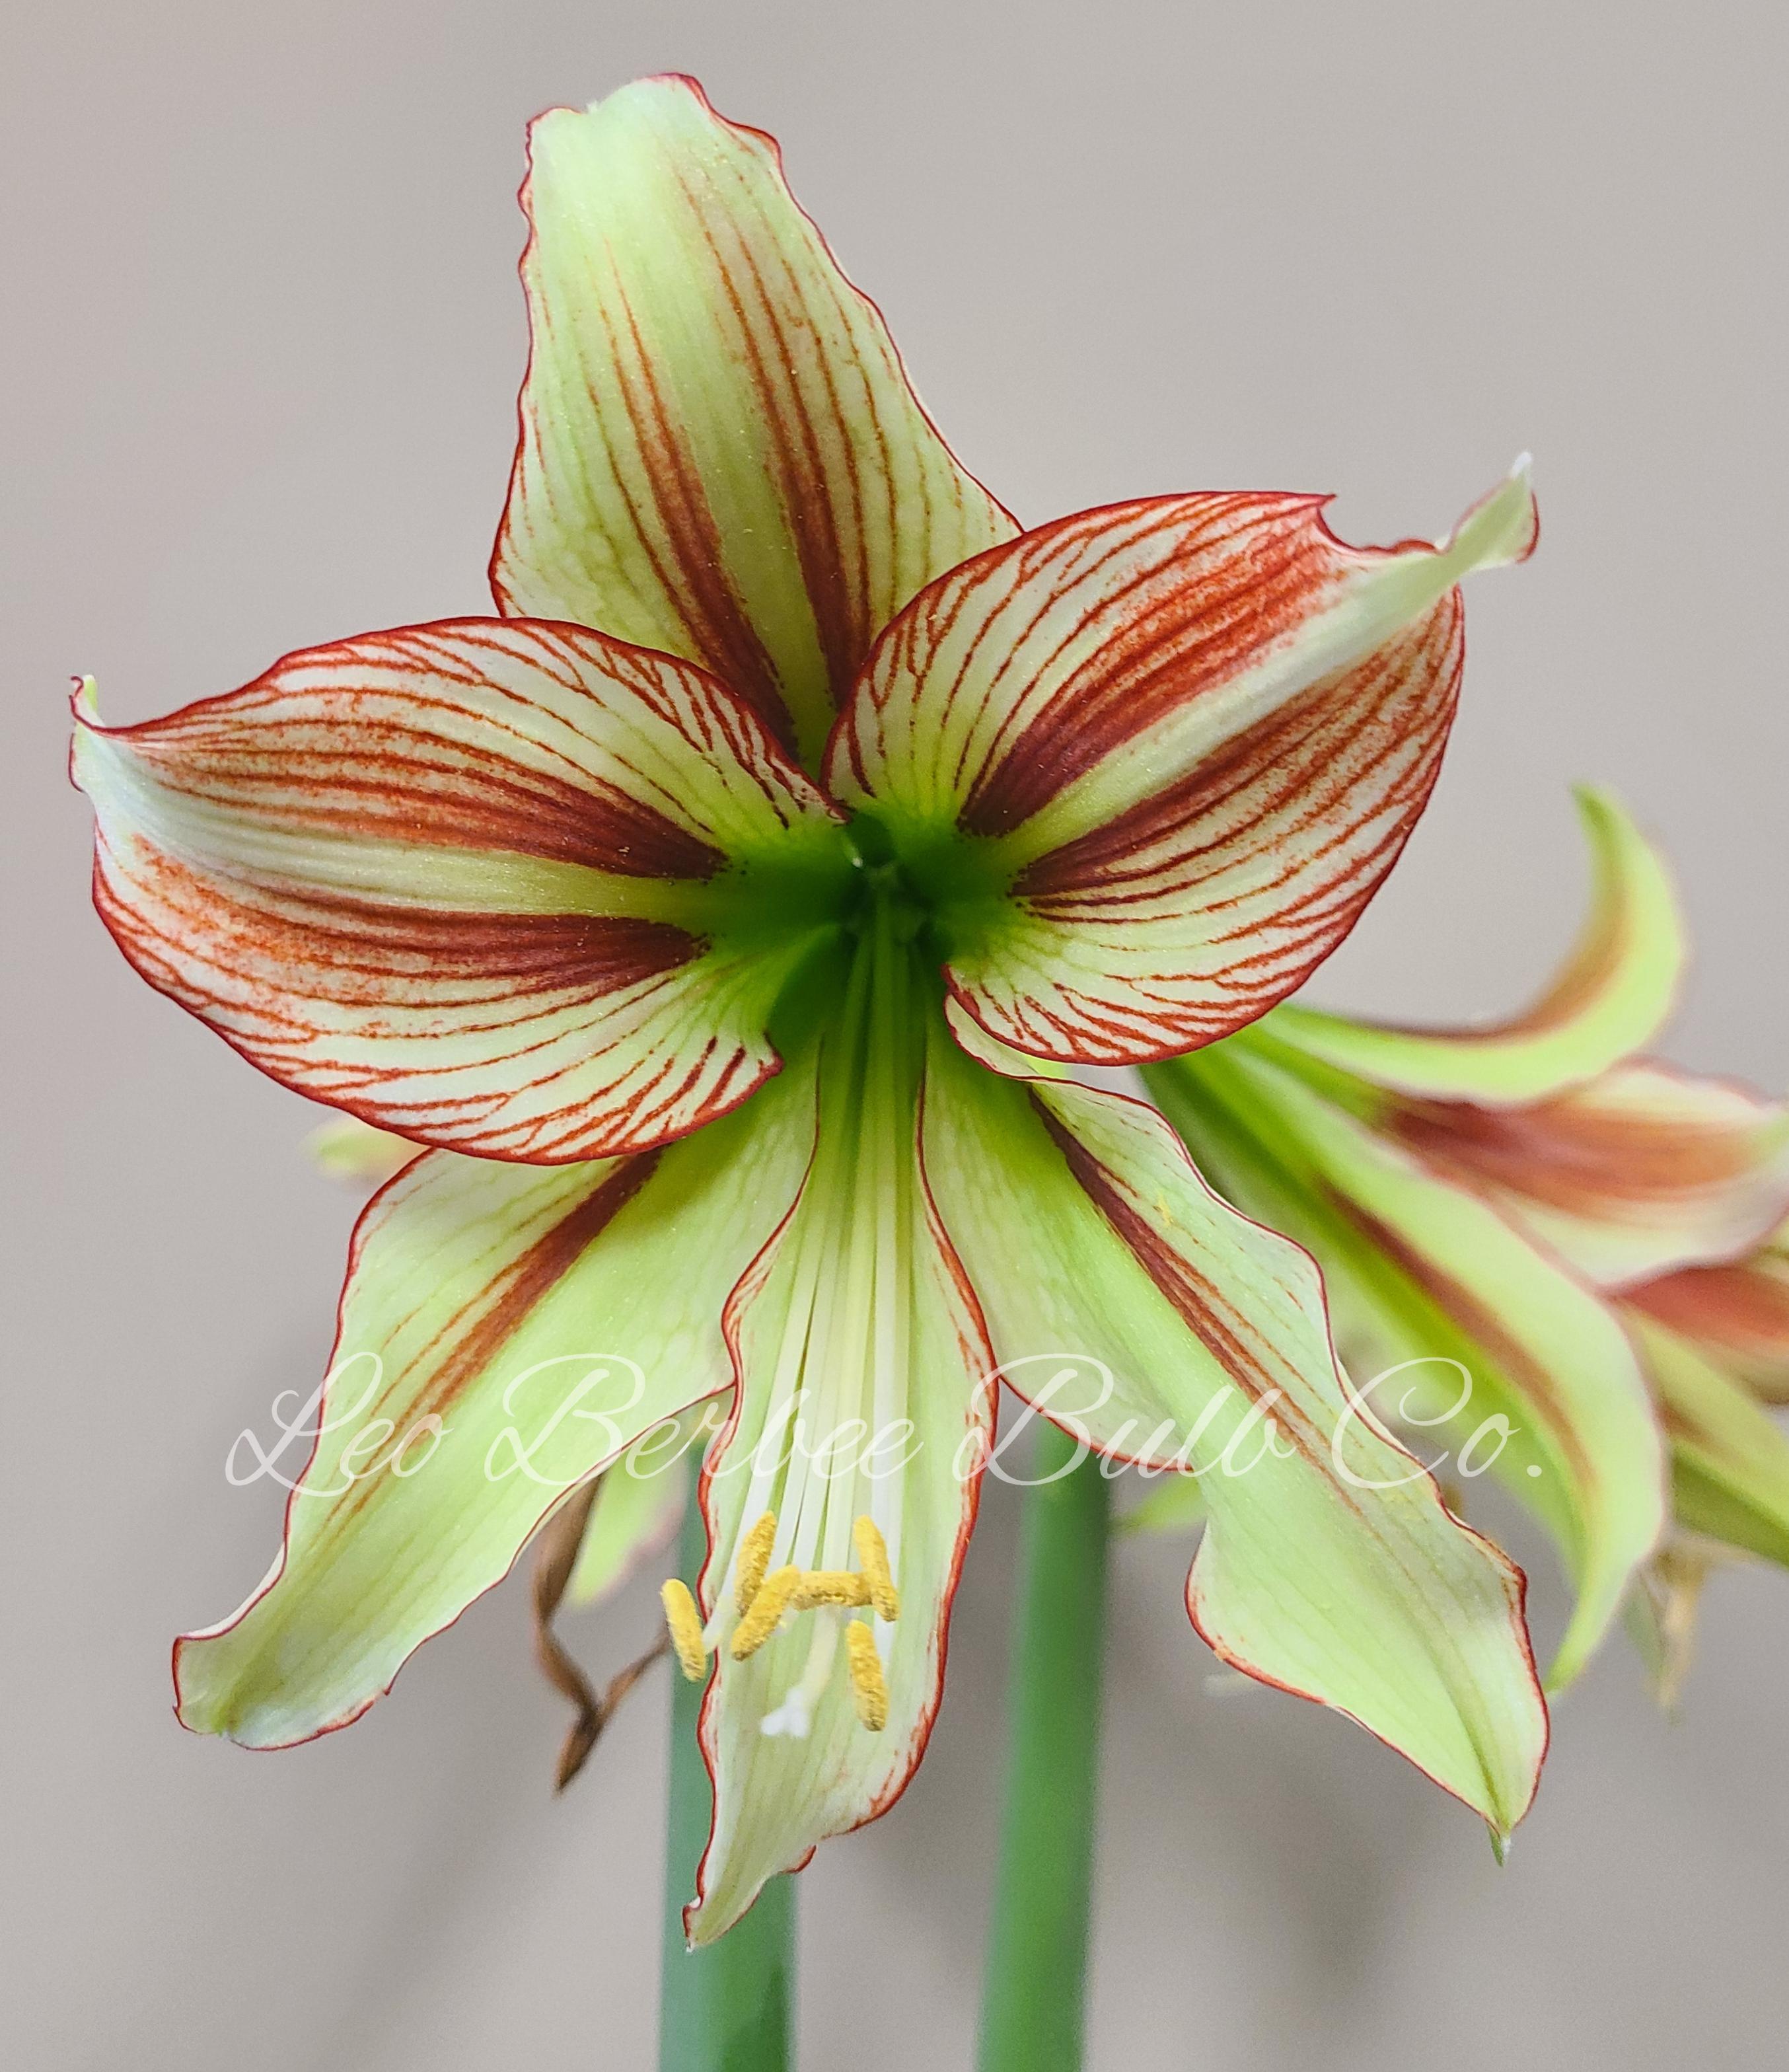 Hippeastrum Holland - Specialty Type 'Cleopatra' - Amaryllis - Coming Soon for Fall 2022! from Leo Berbee Bulb Company